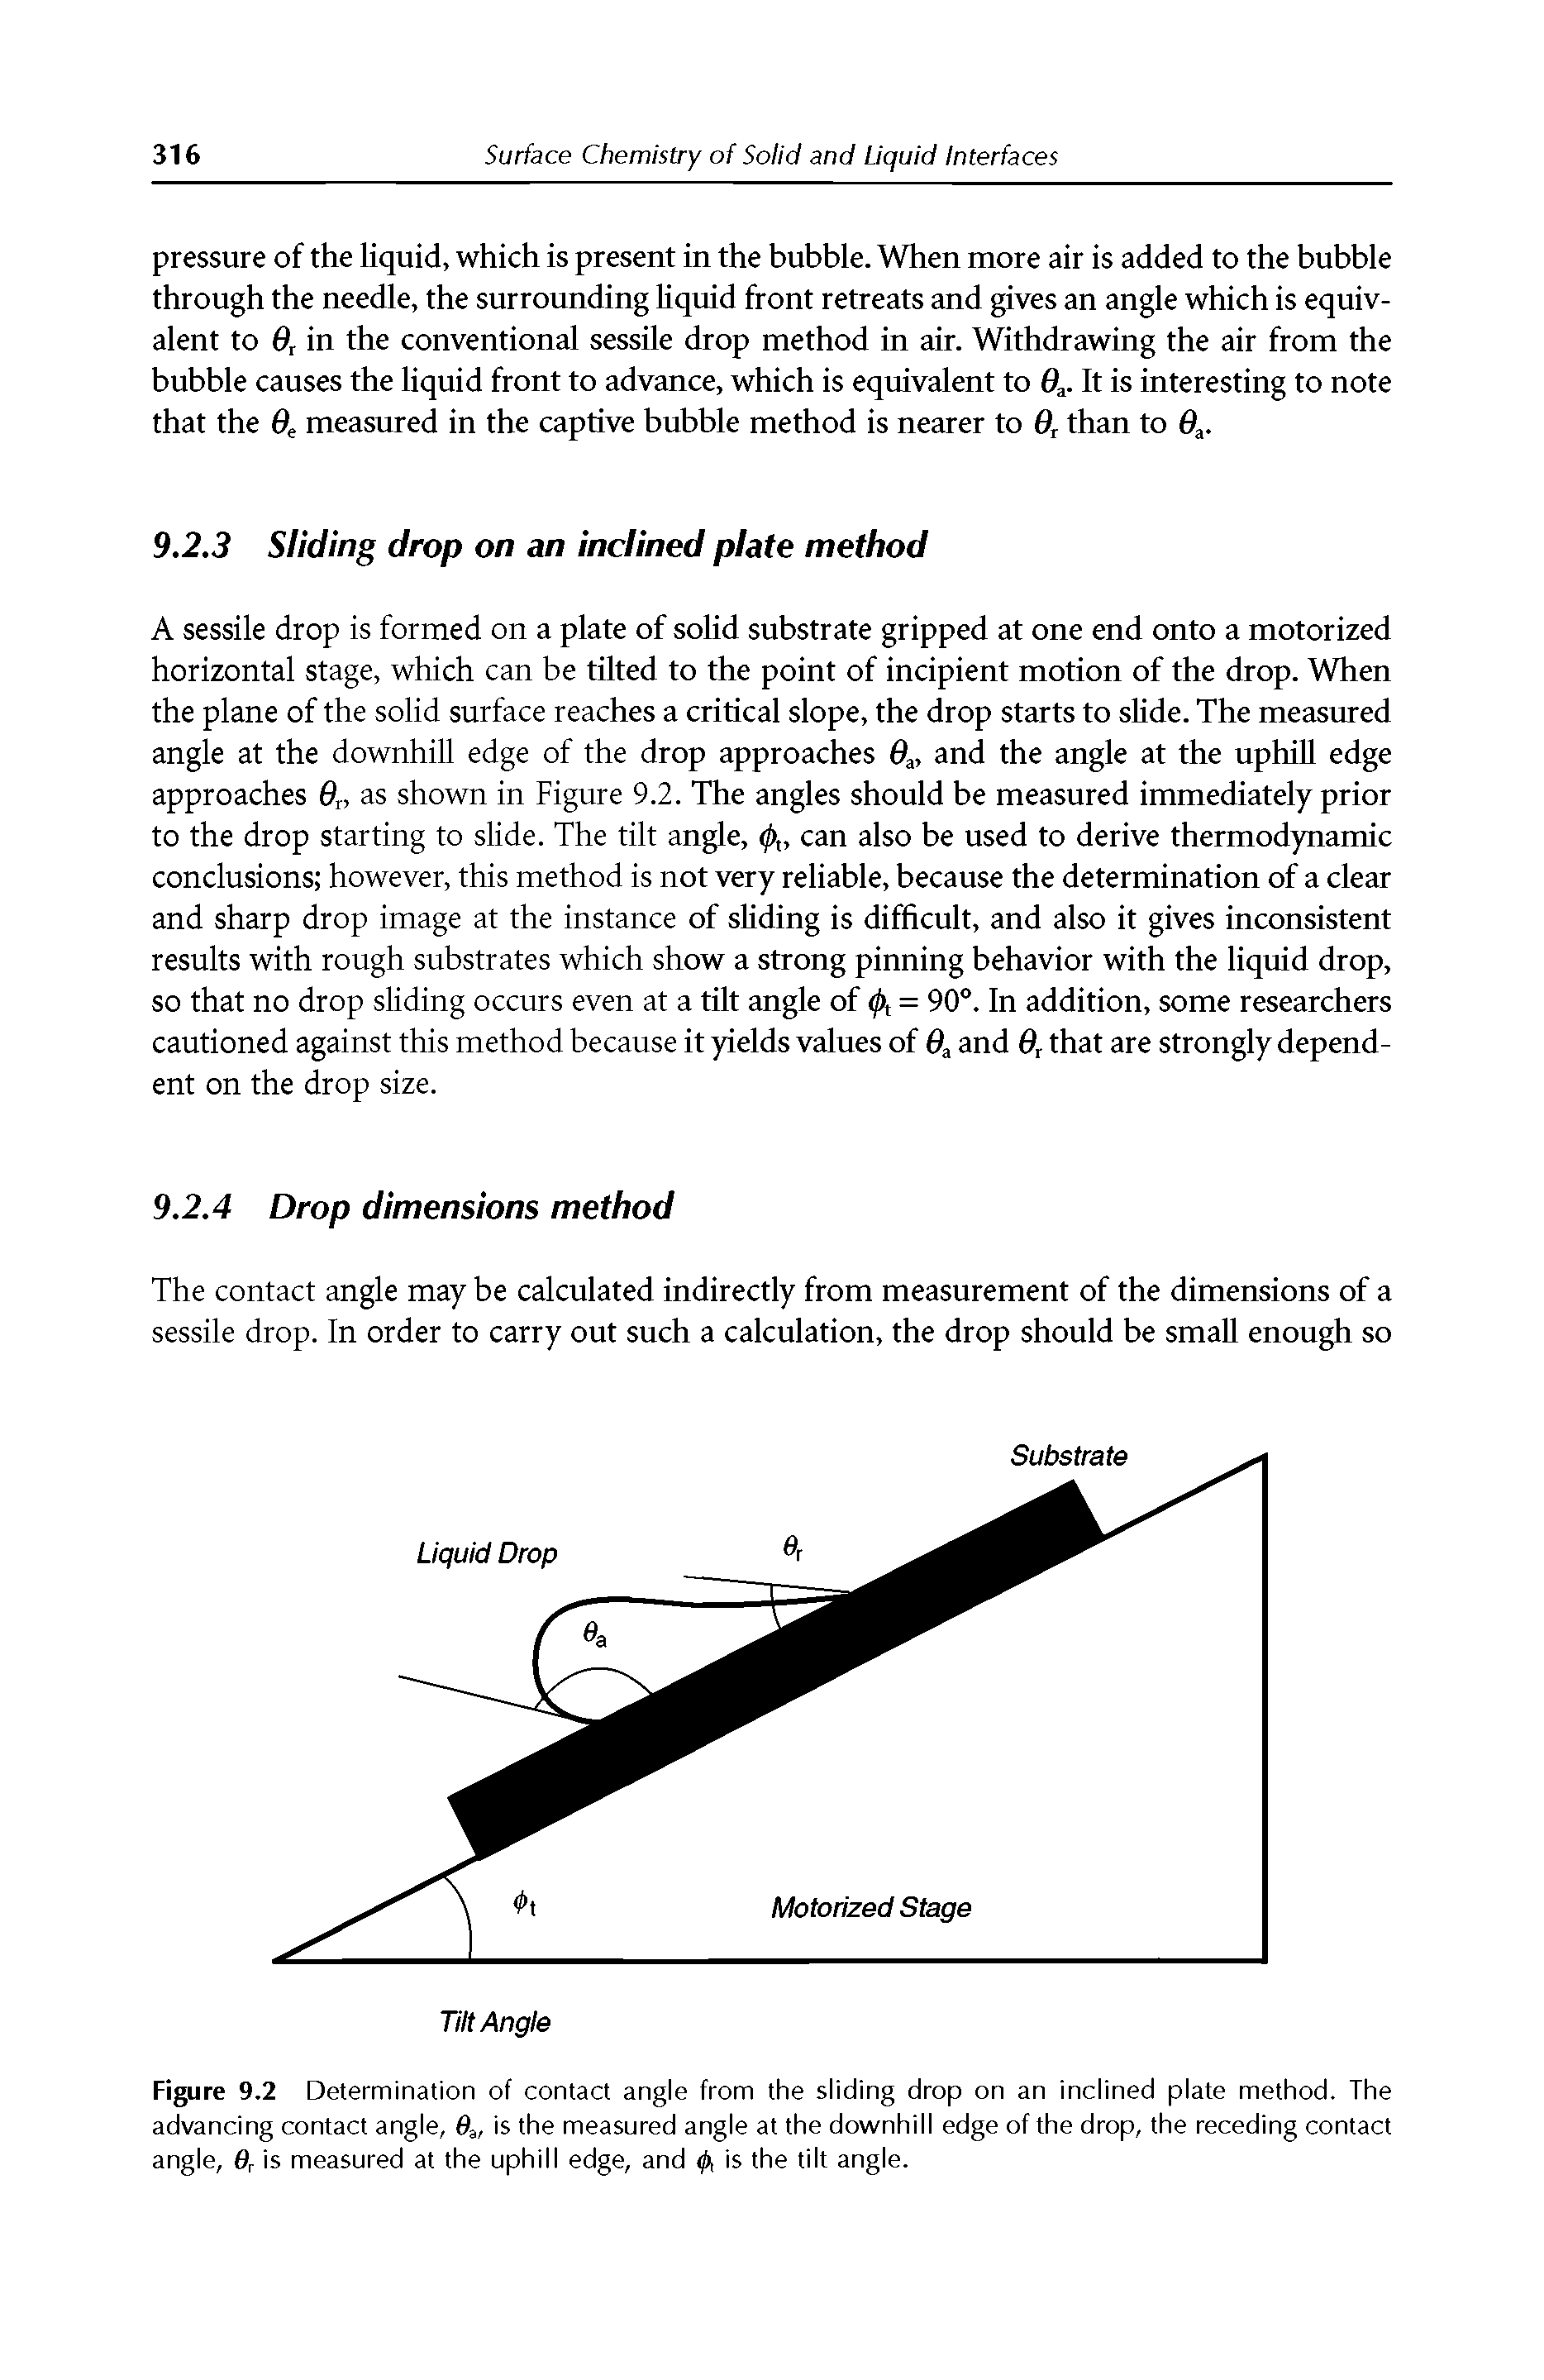 Figure 9.2 Determination of contact angle from the sliding drop on an inclined plate method. The advancing contact angle, 9 , is the measured angle at the downhill edge of the drop, the receding contact angle, 0r is measured at the uphill edge, and 0, is the tilt angle.